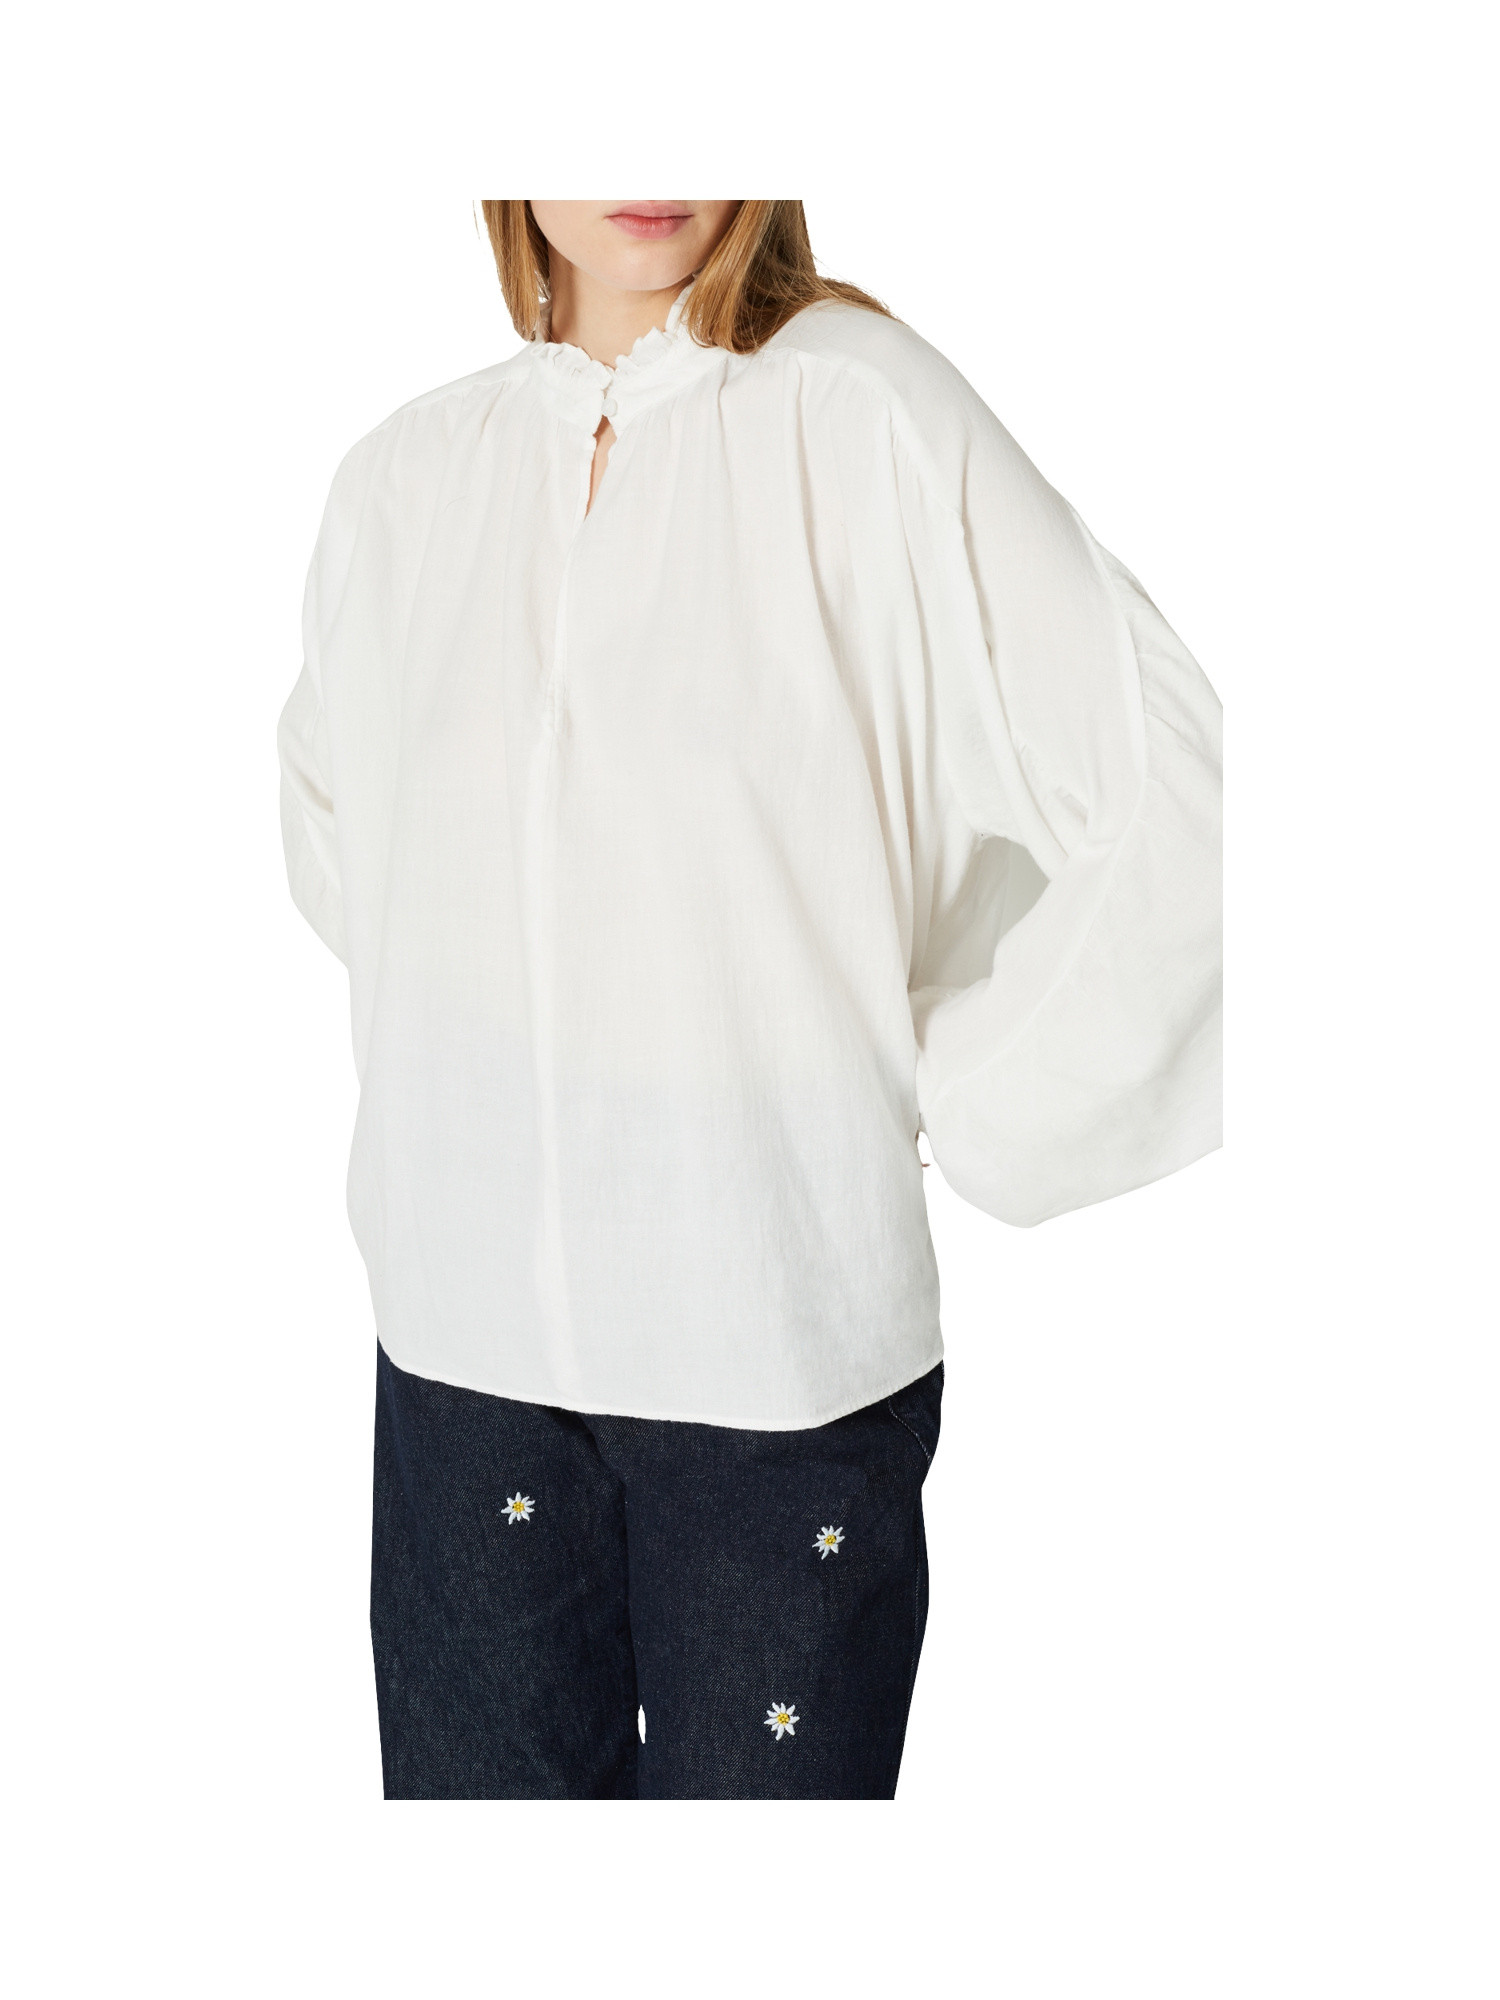 Blusa in cotone con maniche lunghe, Bianco, large image number 5